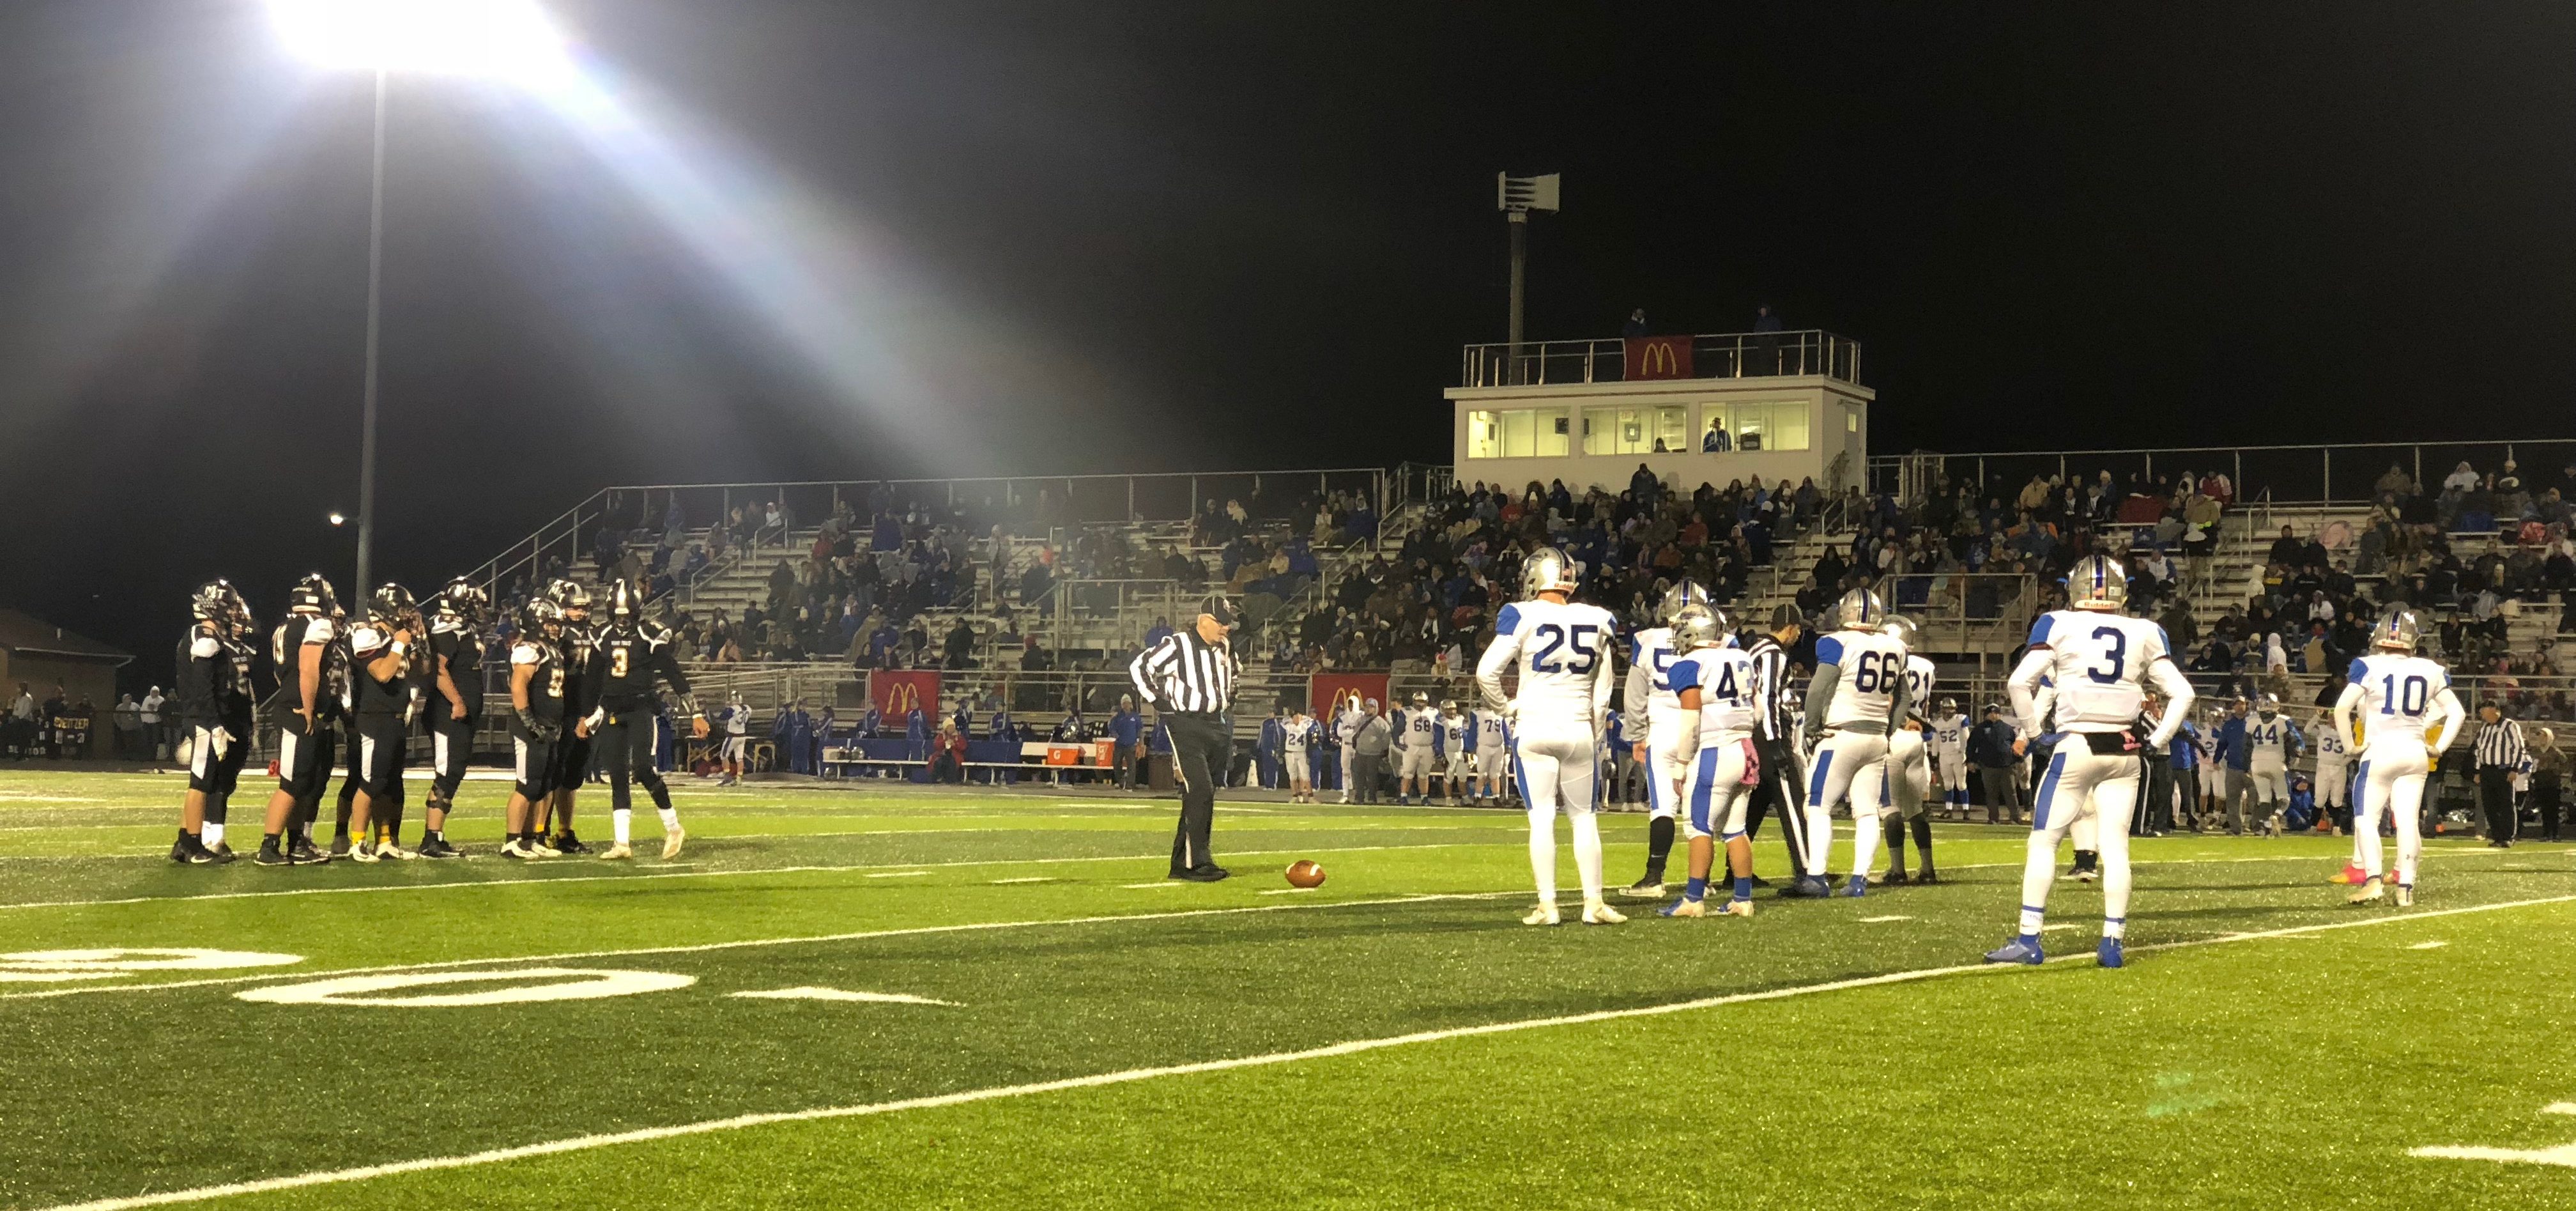 The Washington Court House Blue Lions and the Miami Trace Panthers huddle up before a play on a game during week 10 on November 1, 2019.